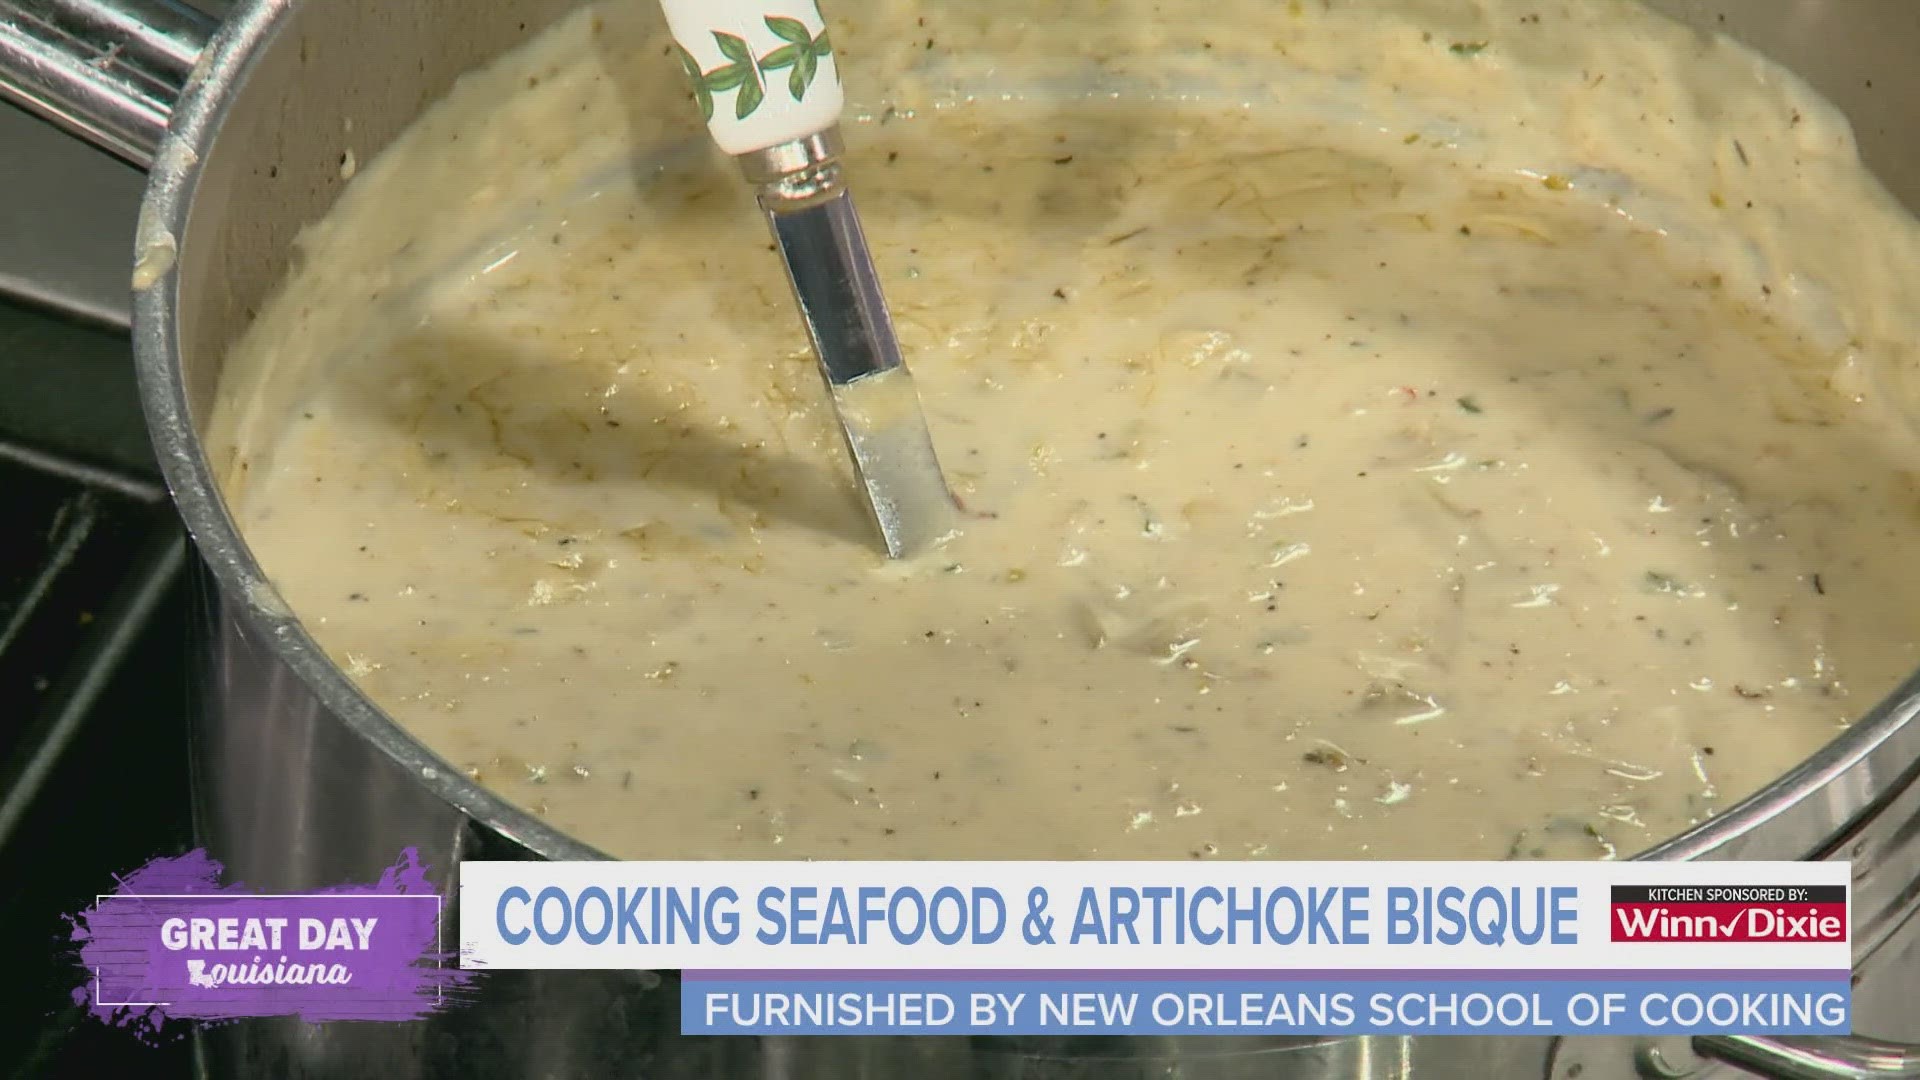 We are in the Winn-Dixie kitchen with Chef Harriet Robin to get the recipe for her seafood & artichoke bisque recipe.